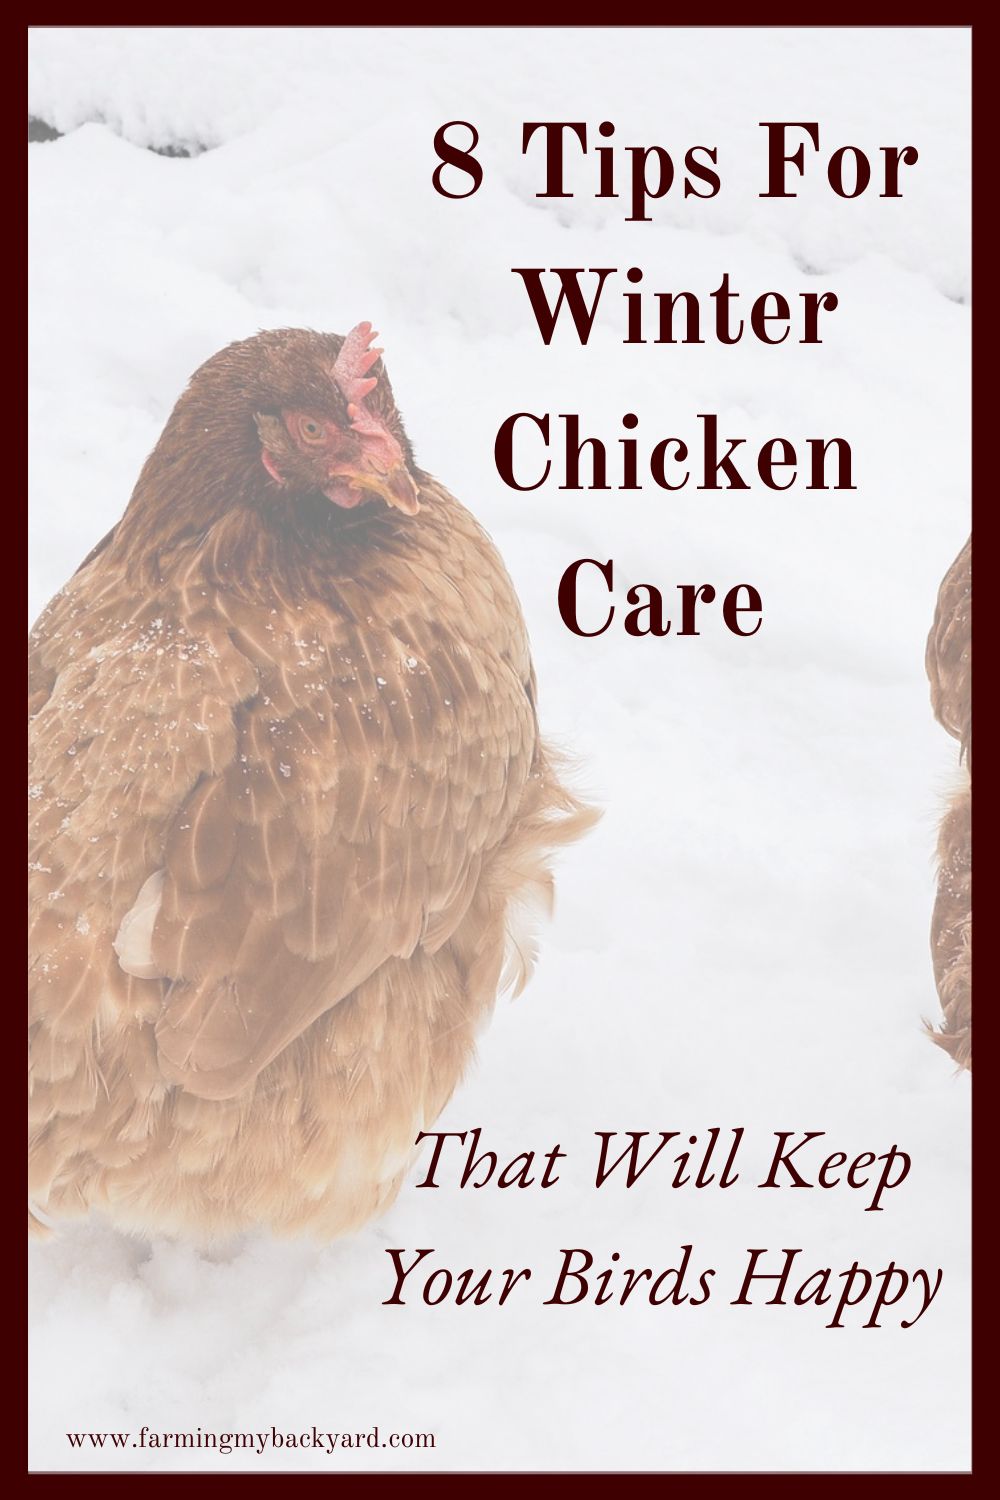 Here are tips for winter chicken care that you need you to do. They will keep your hens happy even when it's cold and icy outdoors.